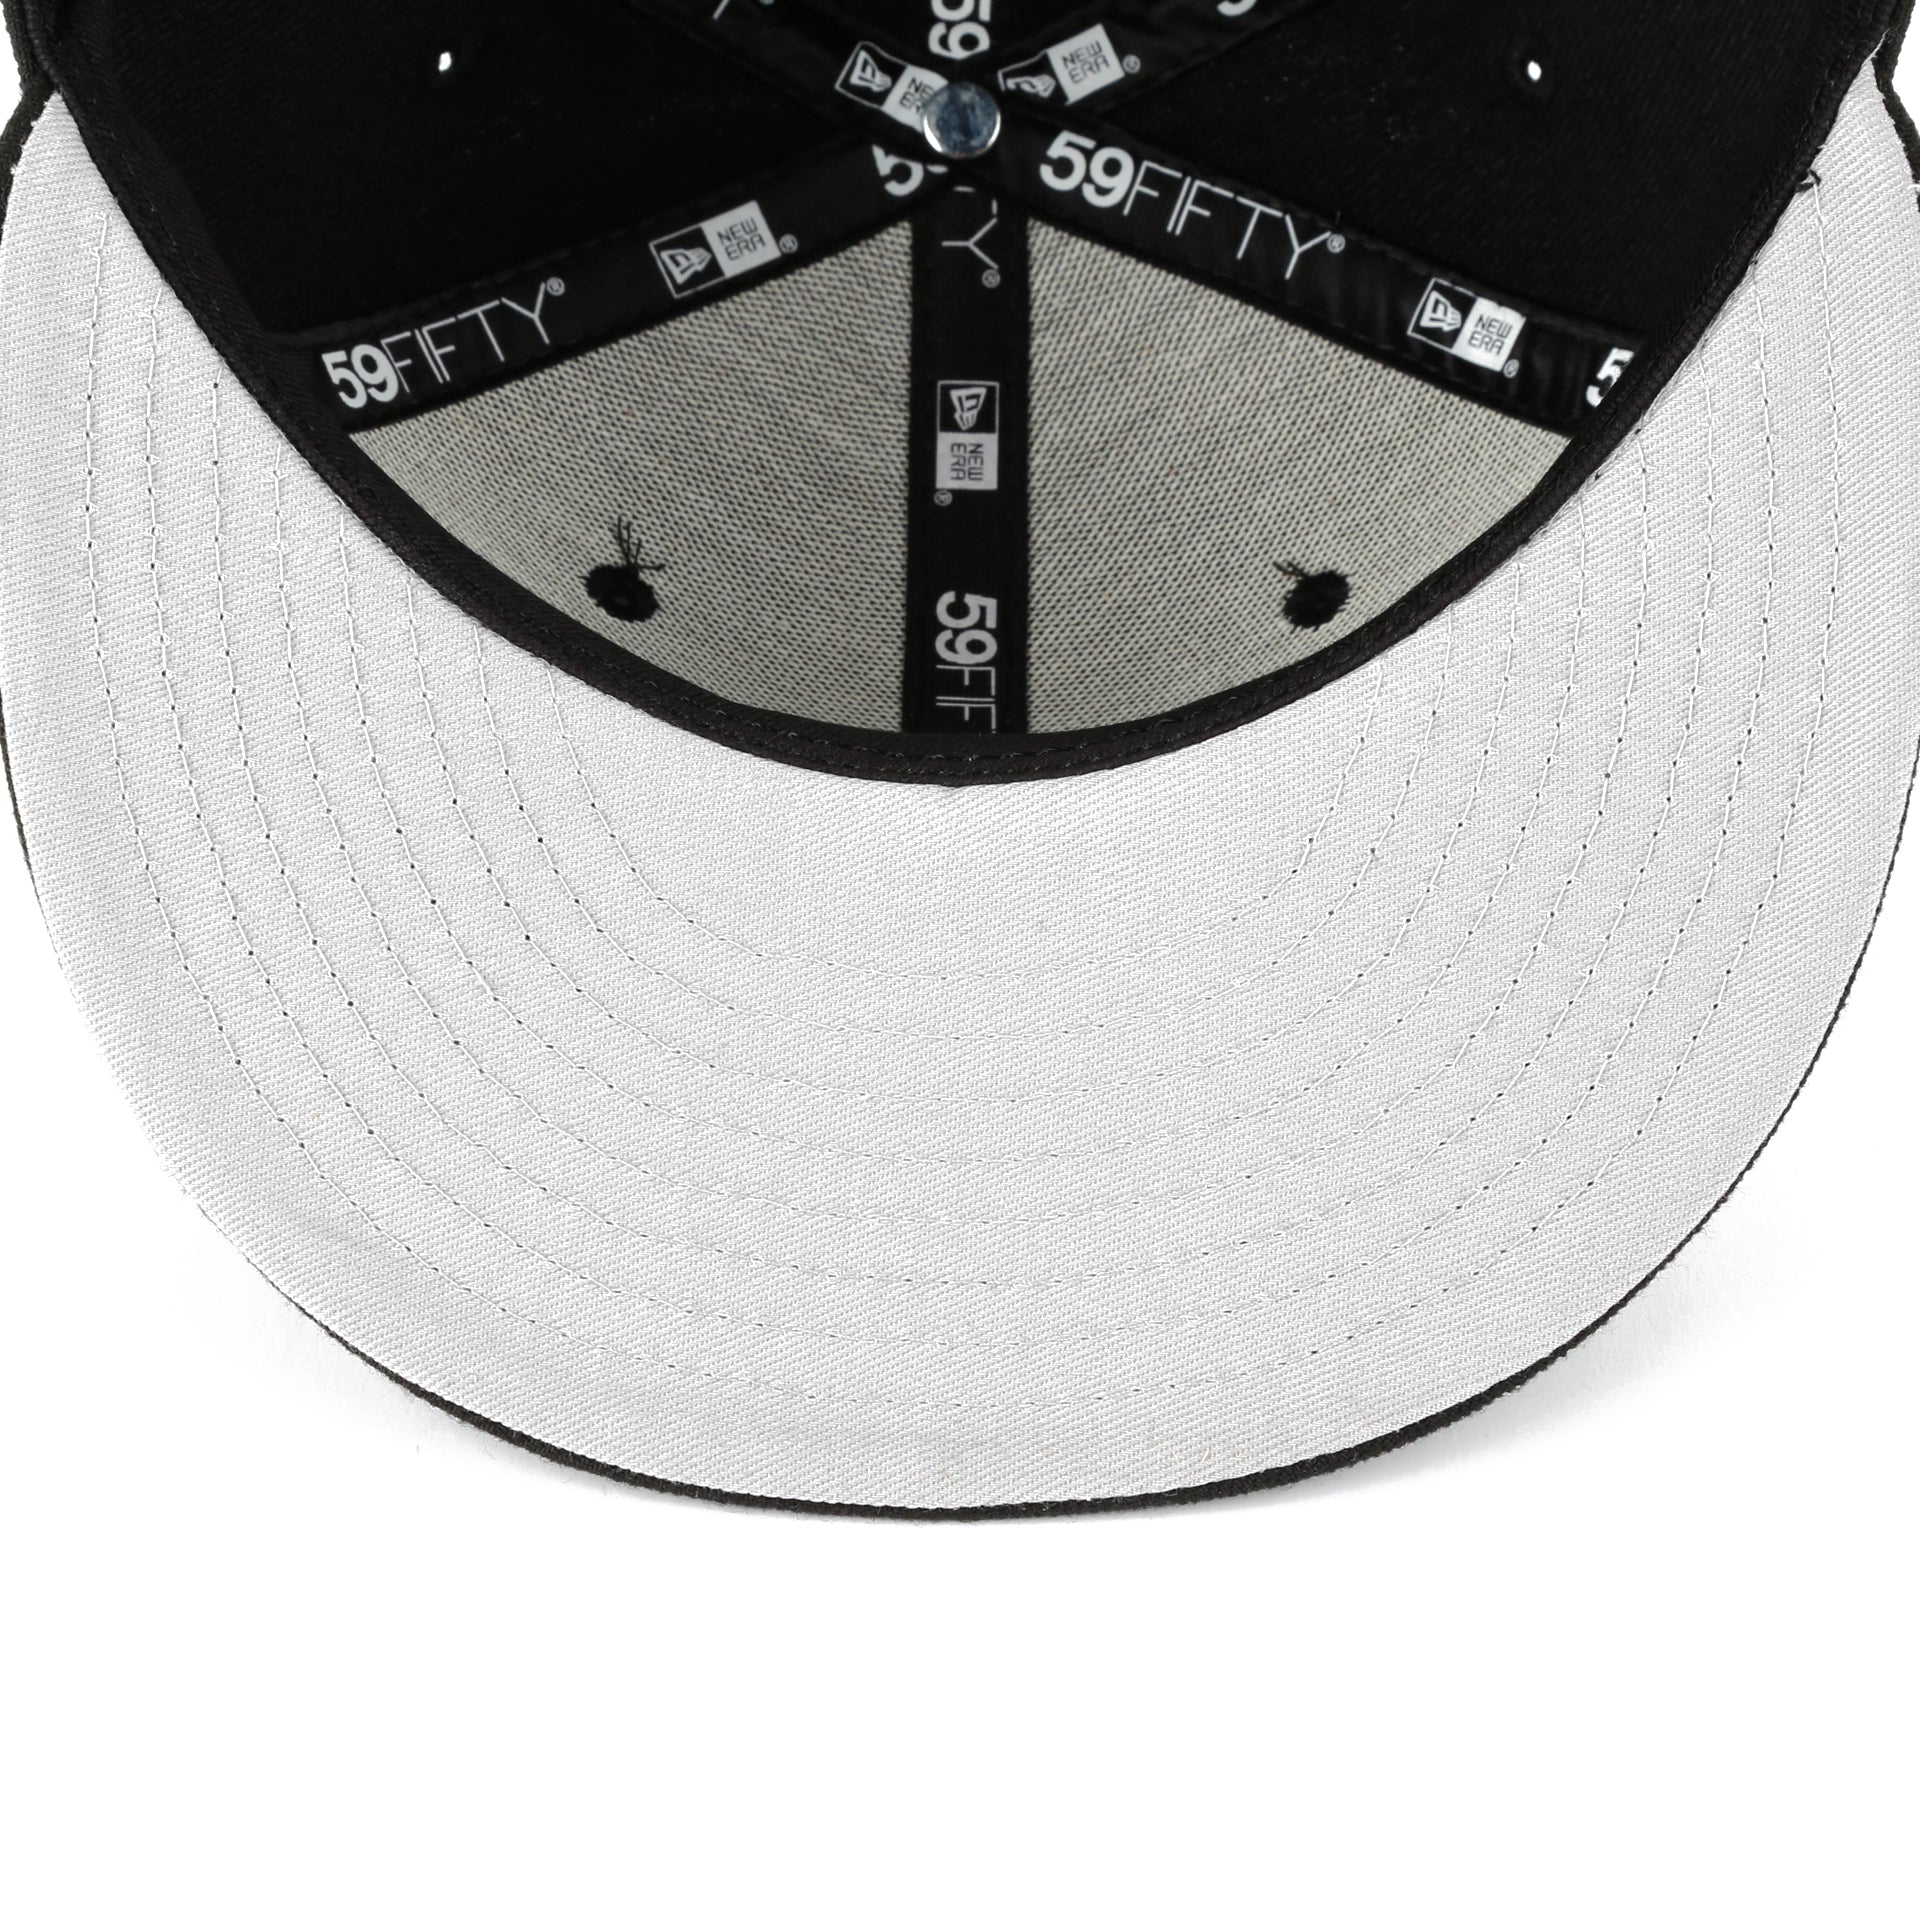 New Era 59Fifty League Basic Fitted Cap - Los Angeles Dodgers/Black - New  Star